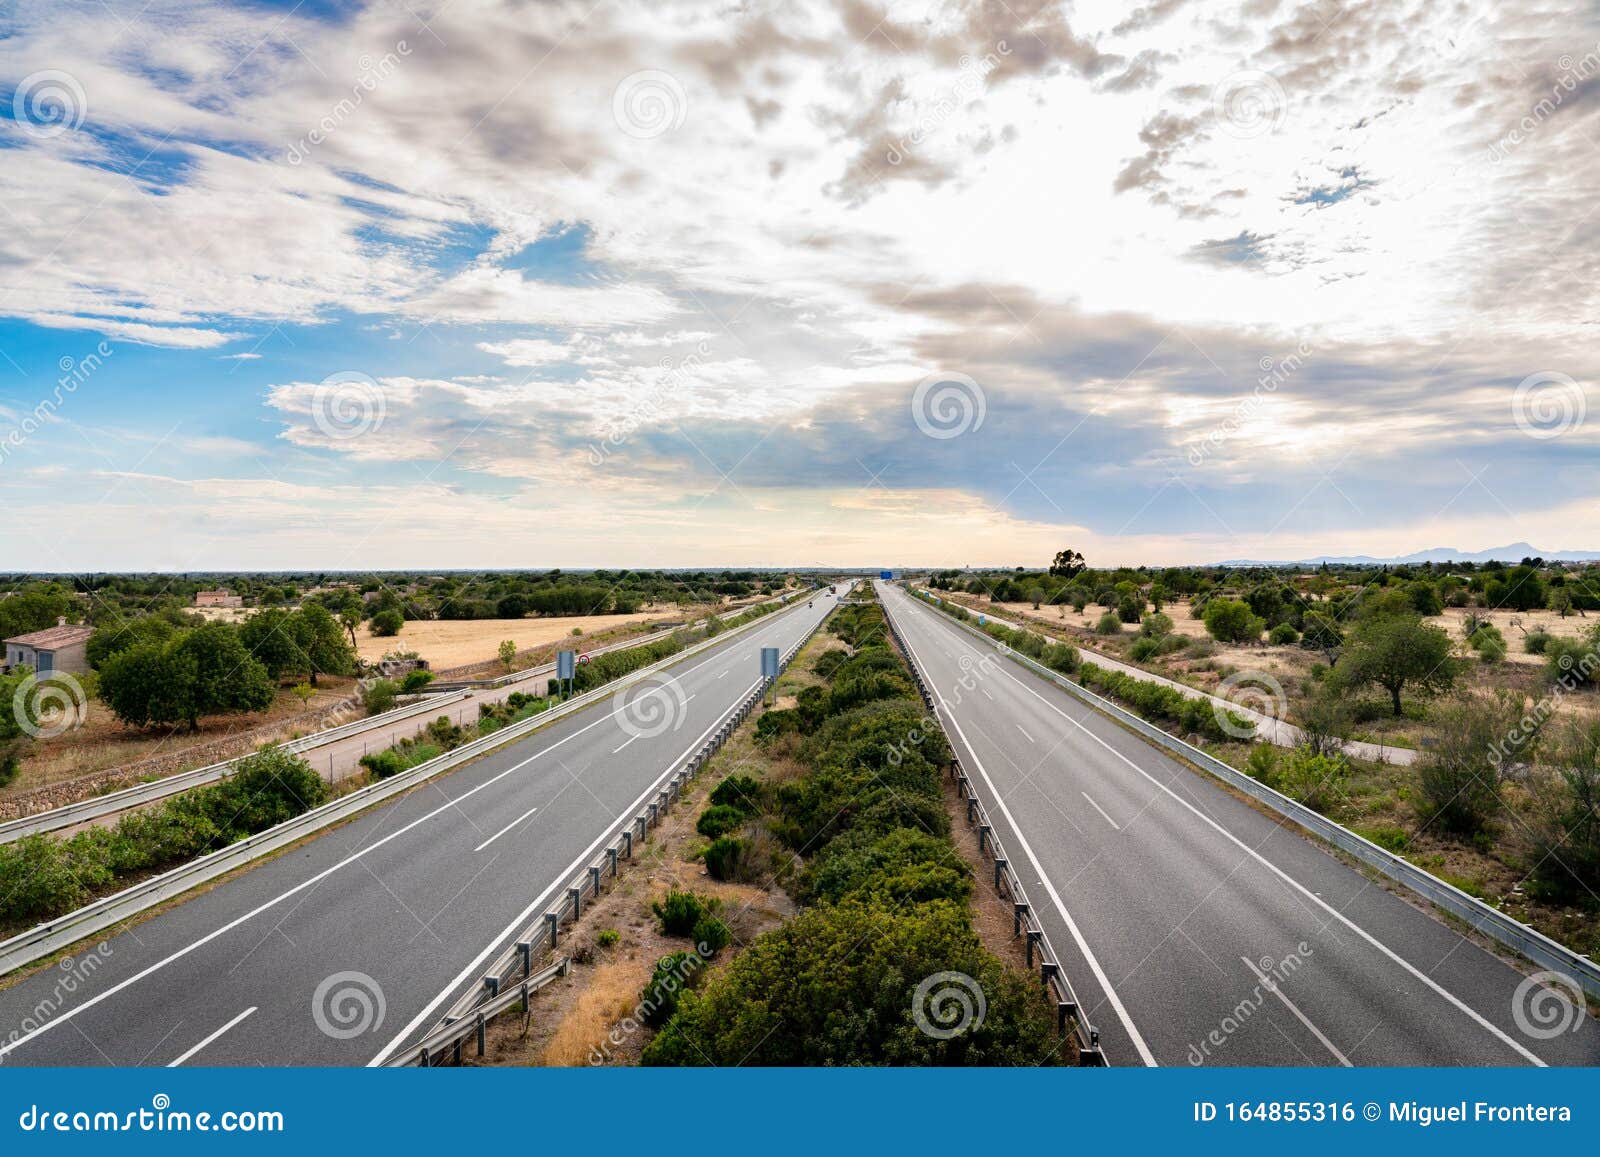 empty highway in mallorca with spectacular sky